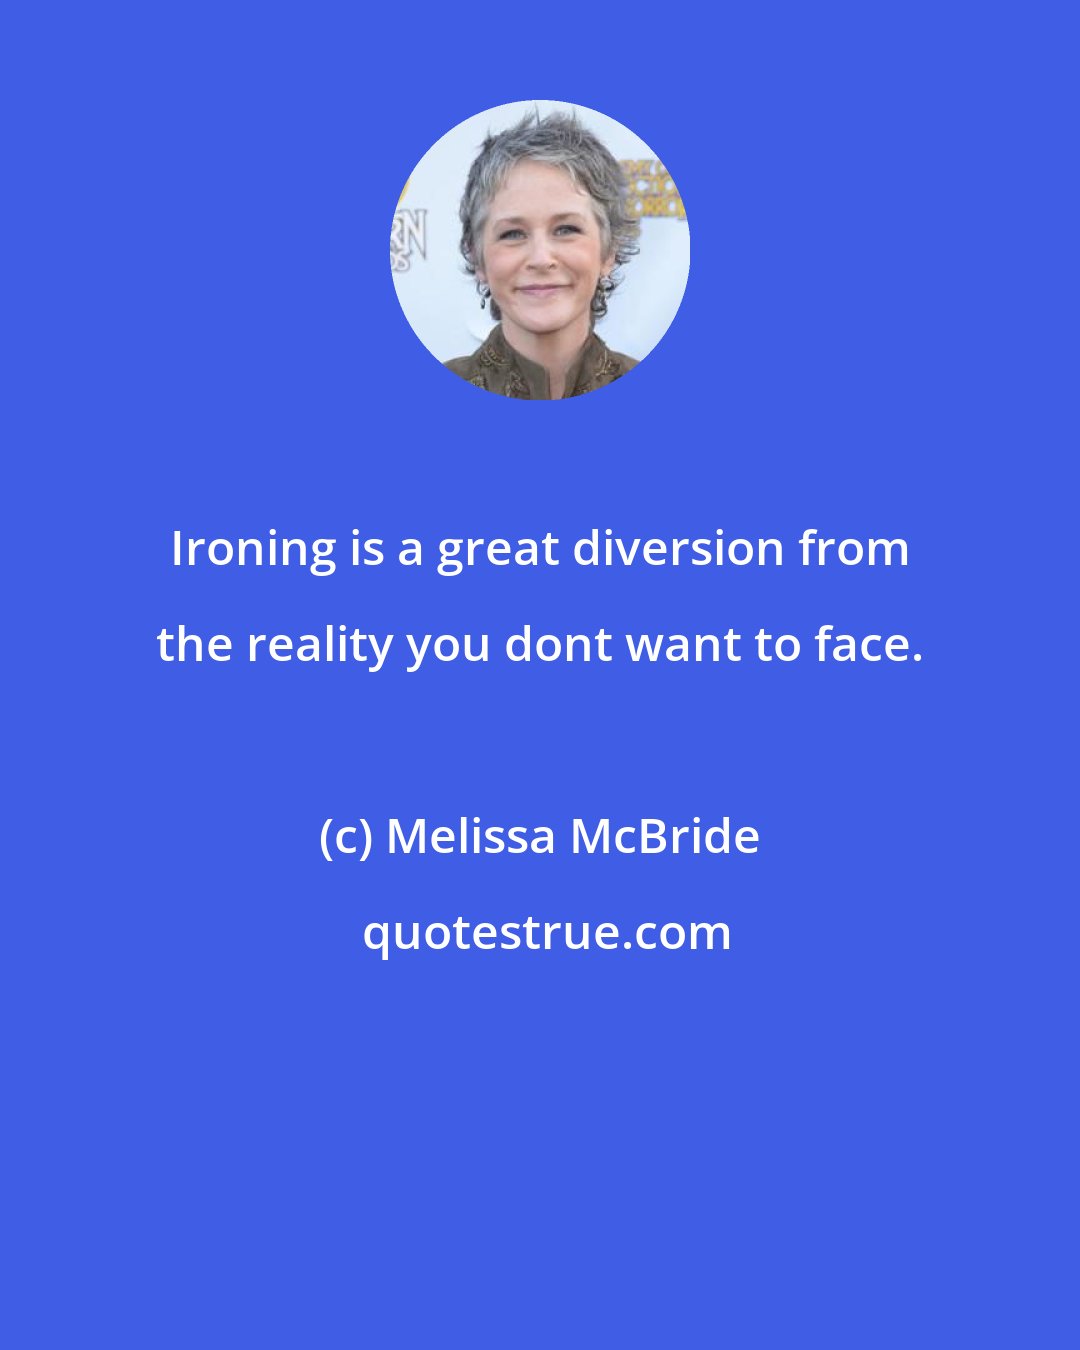 Melissa McBride: Ironing is a great diversion from the reality you dont want to face.